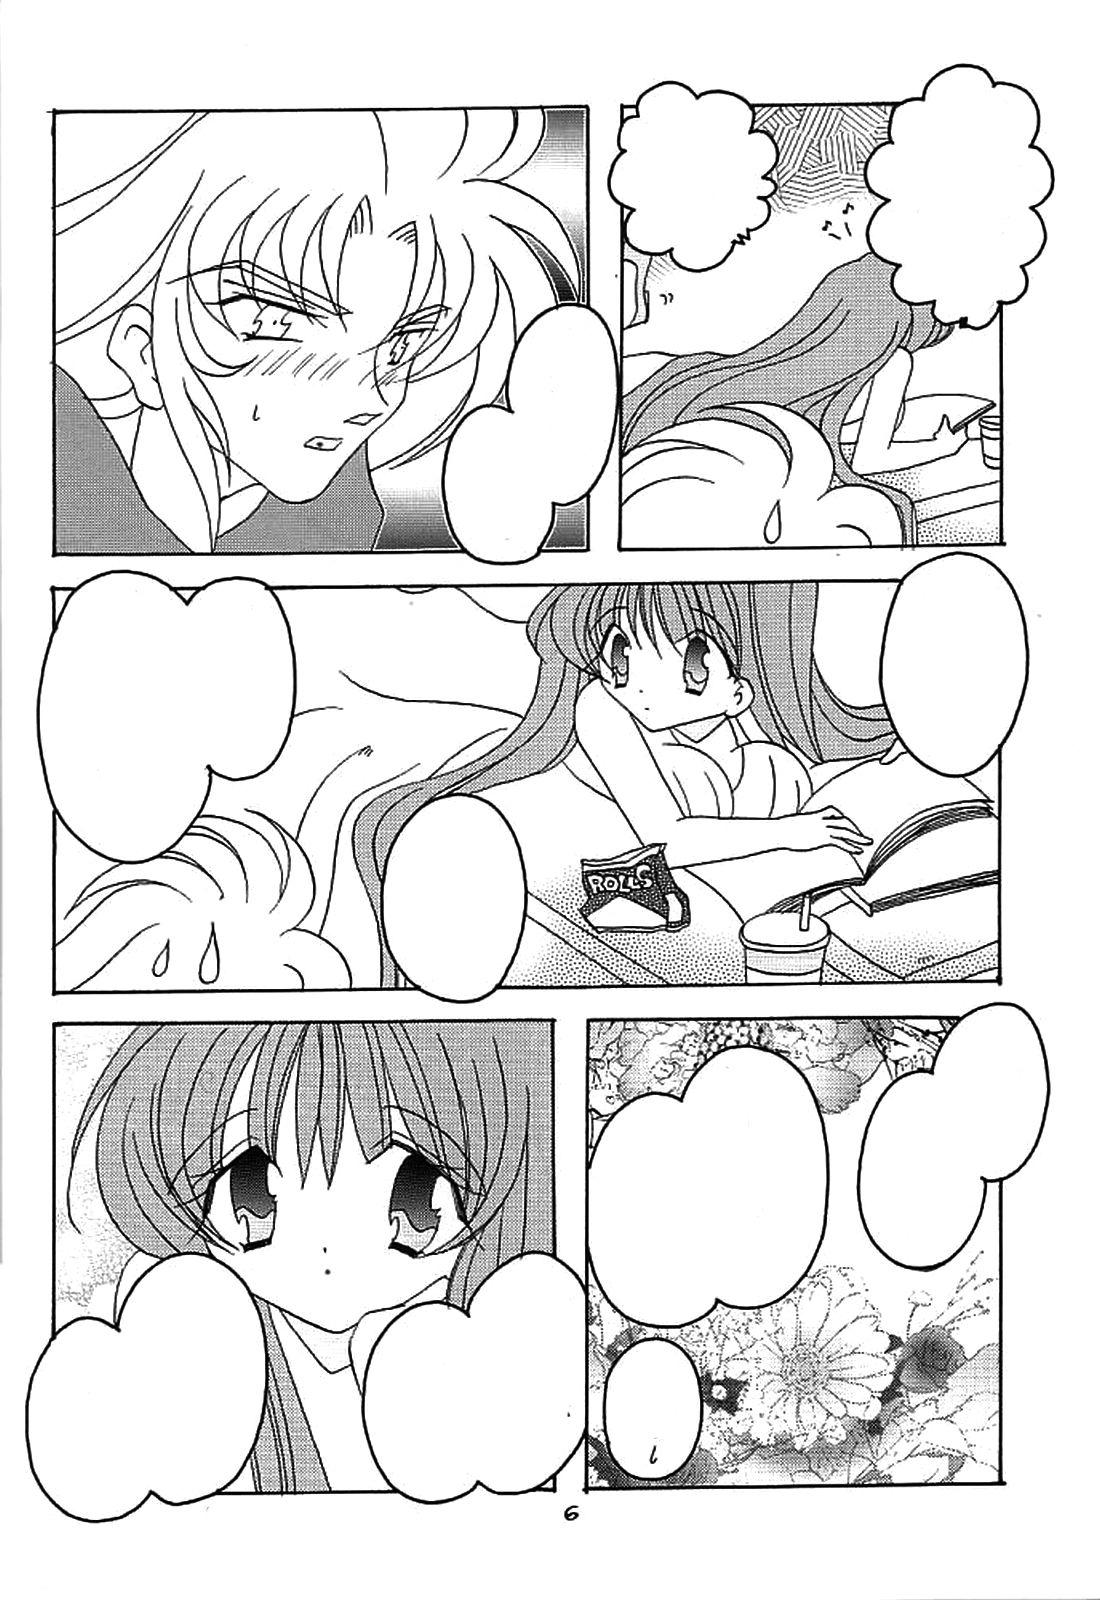 Cameltoe You are my Reason to Be 6 - Saint seiya People Having Sex - Page 5